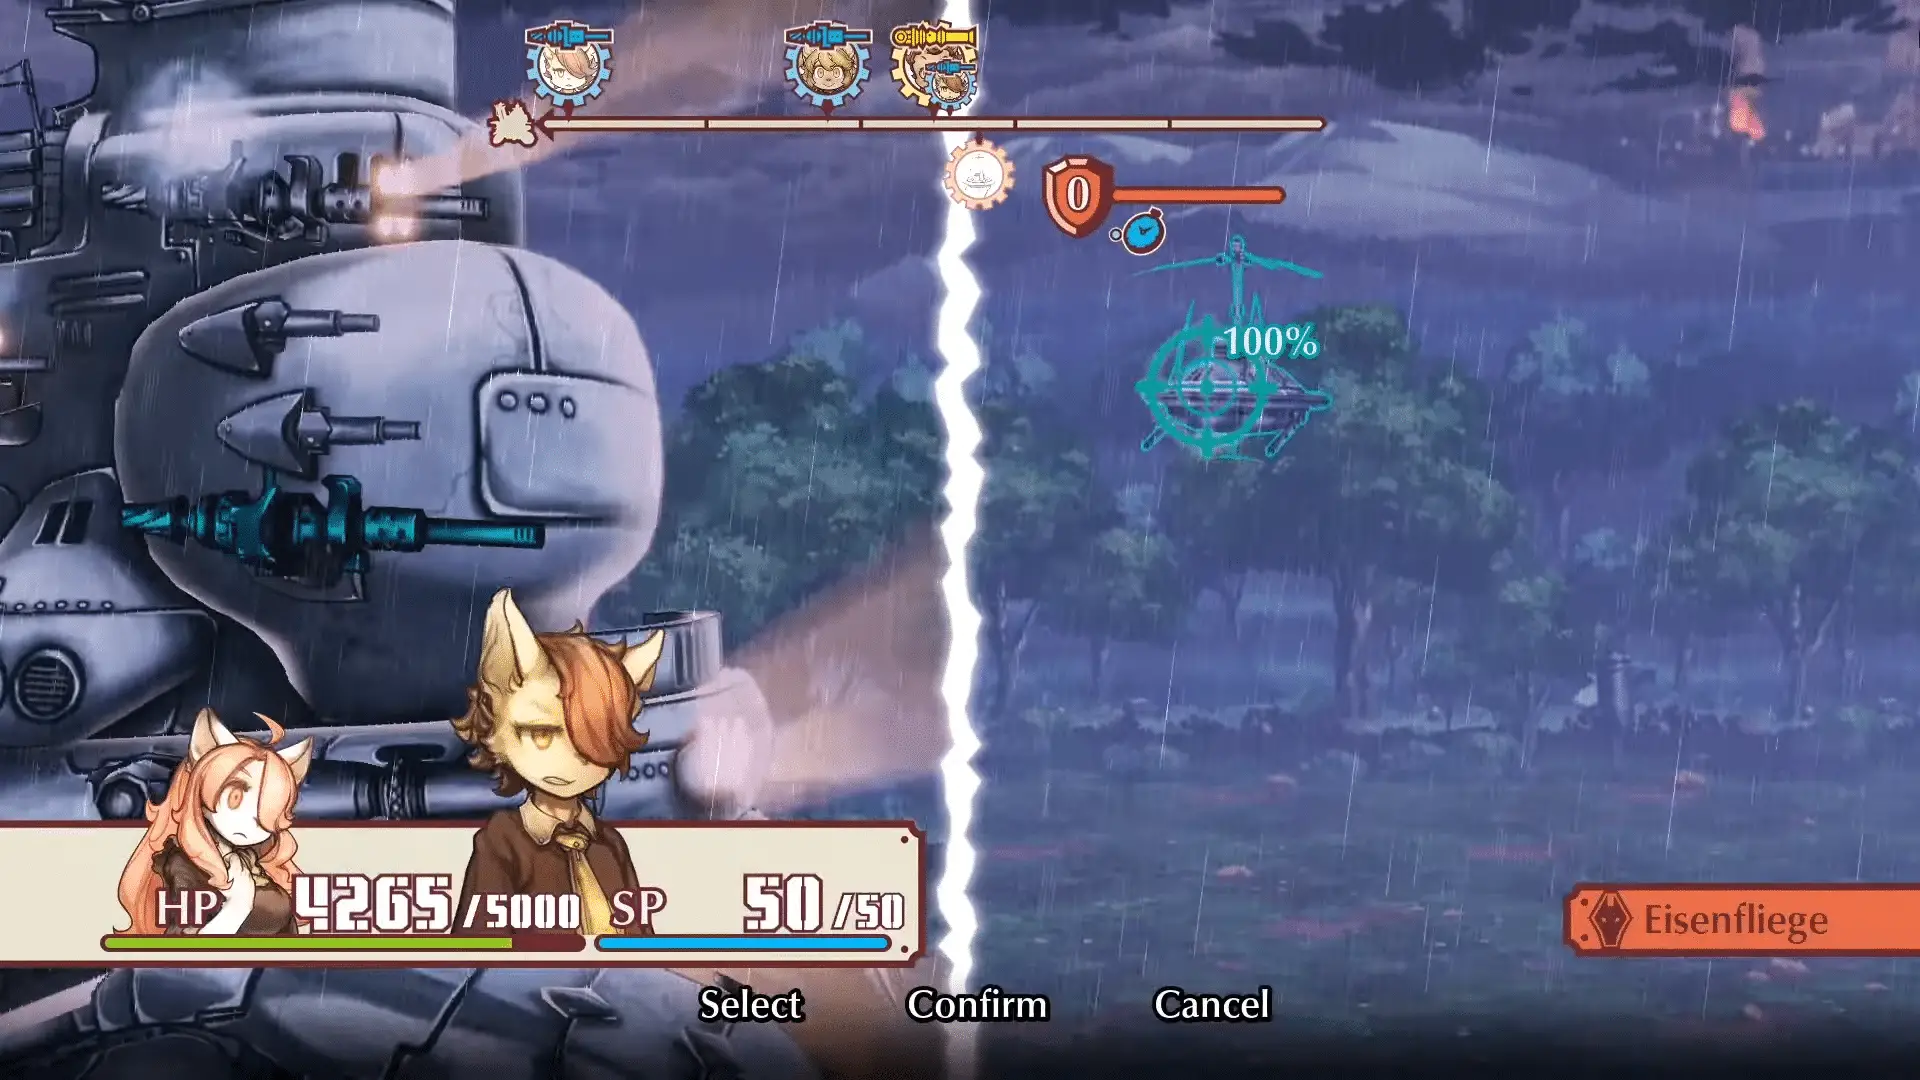 Fuga: Melodies of Steel Gets Two New Videos Exploring the Basics of its Battle System